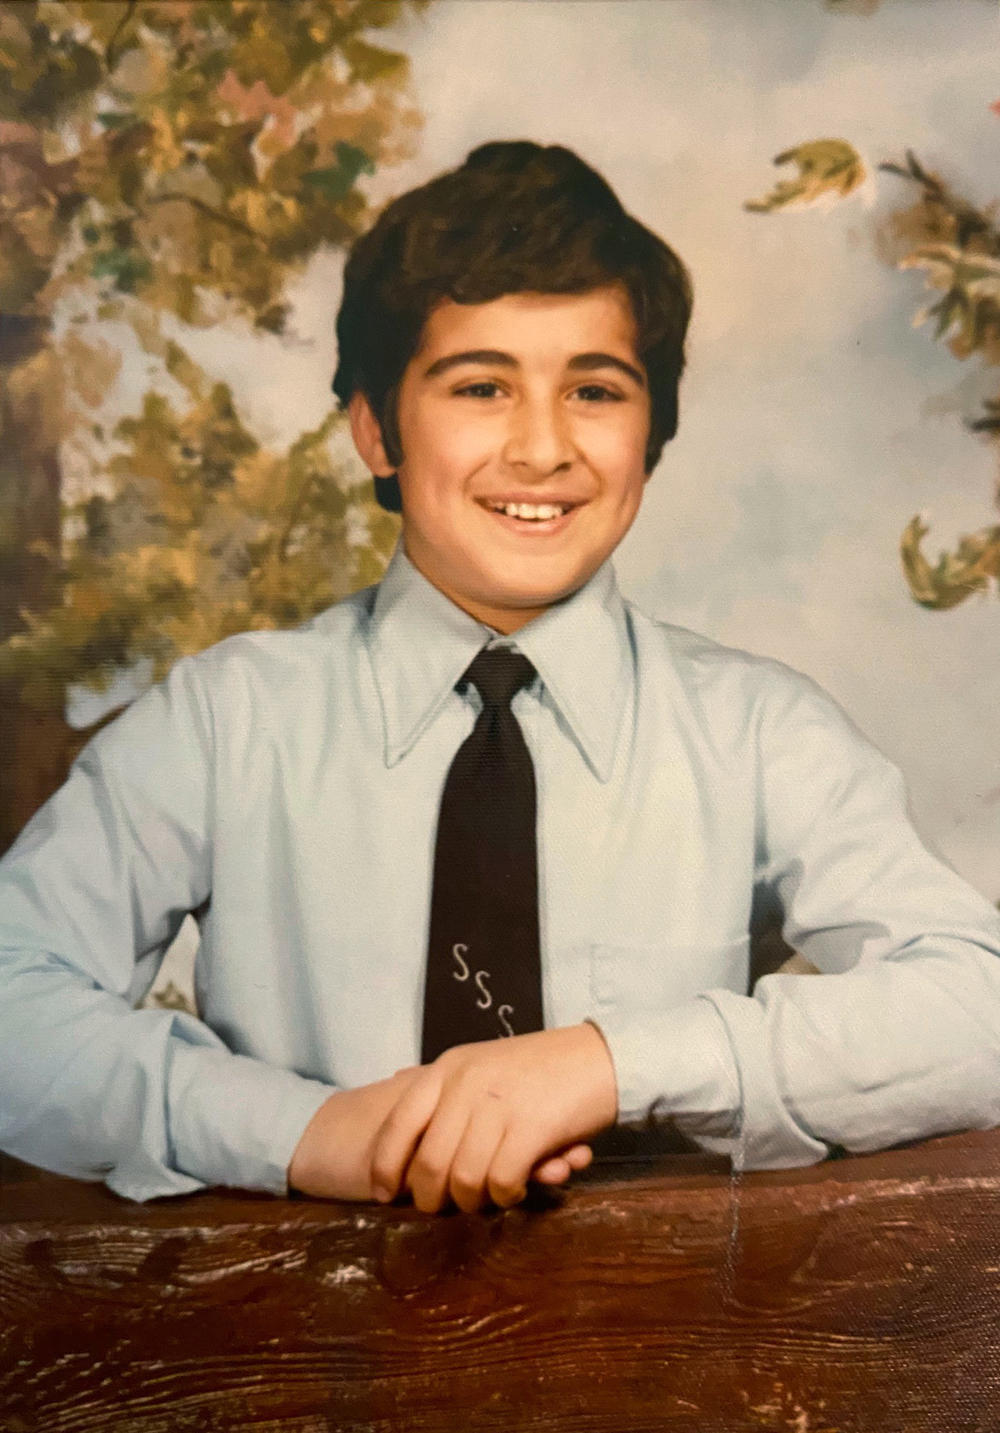 Frank Spinelli in 1978 at age 11.